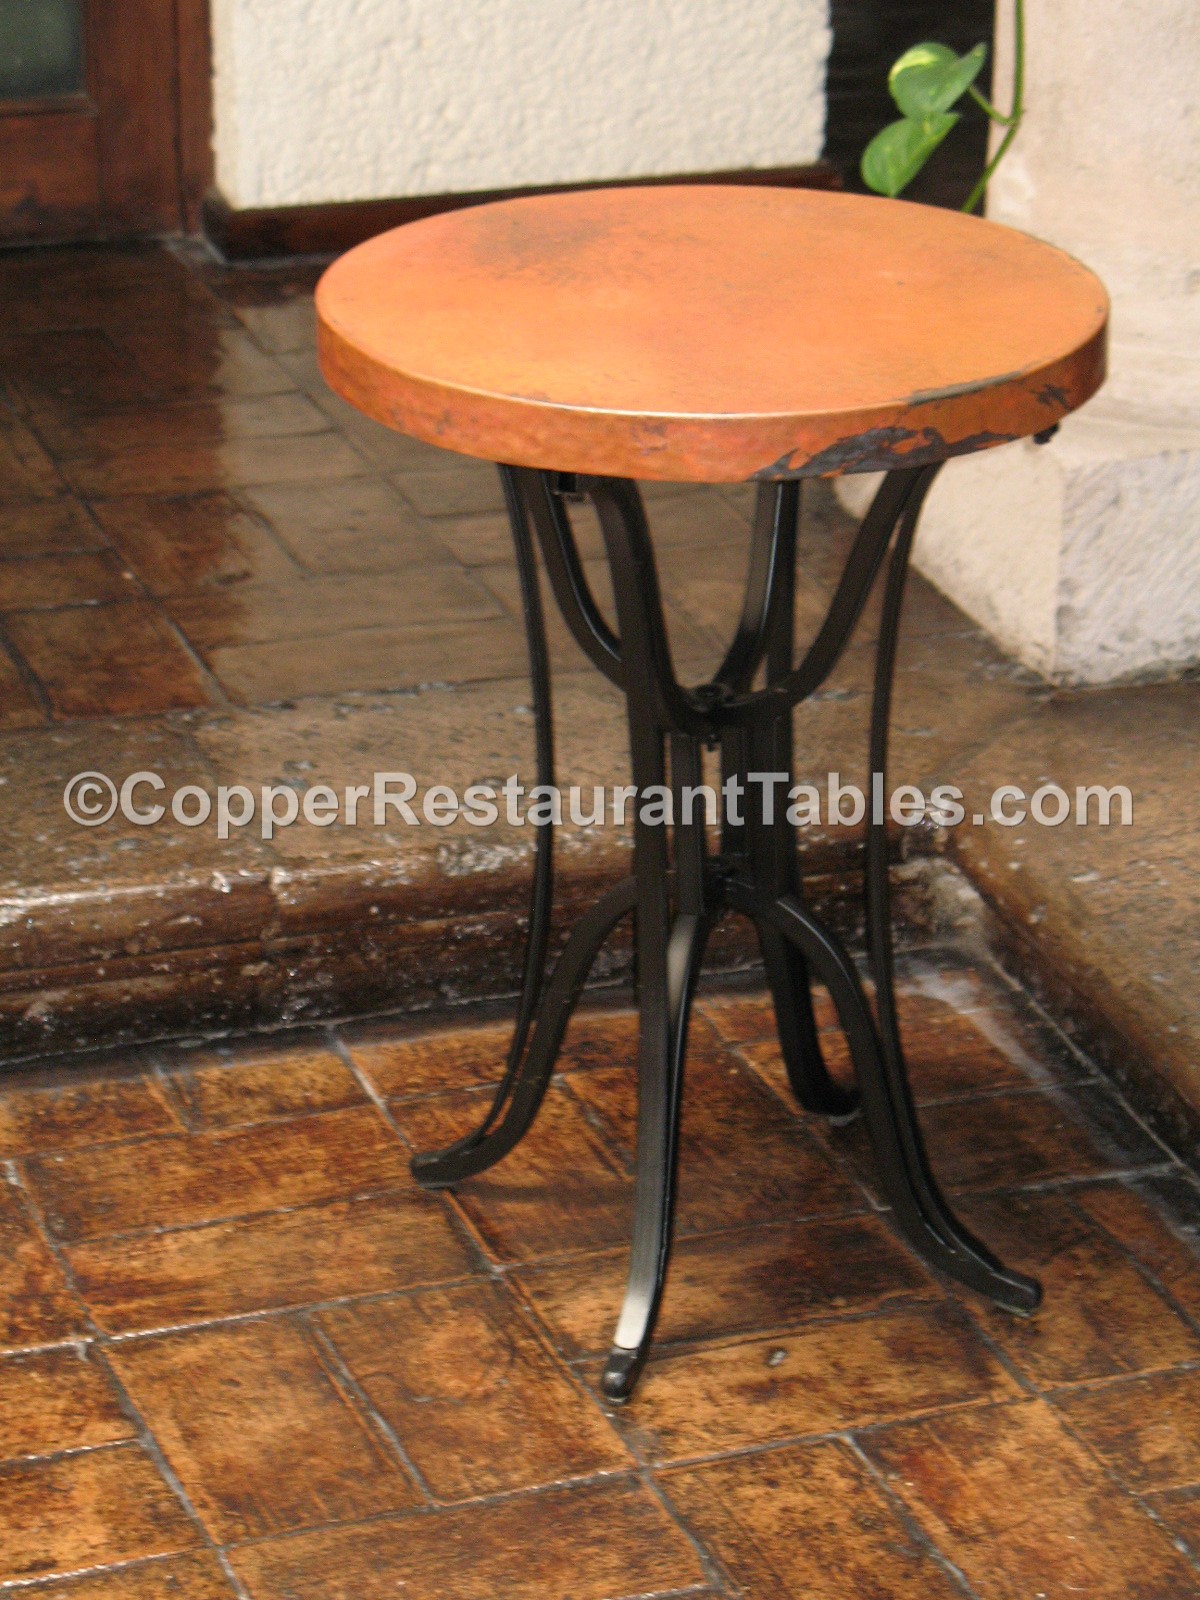 24 inch copper table top